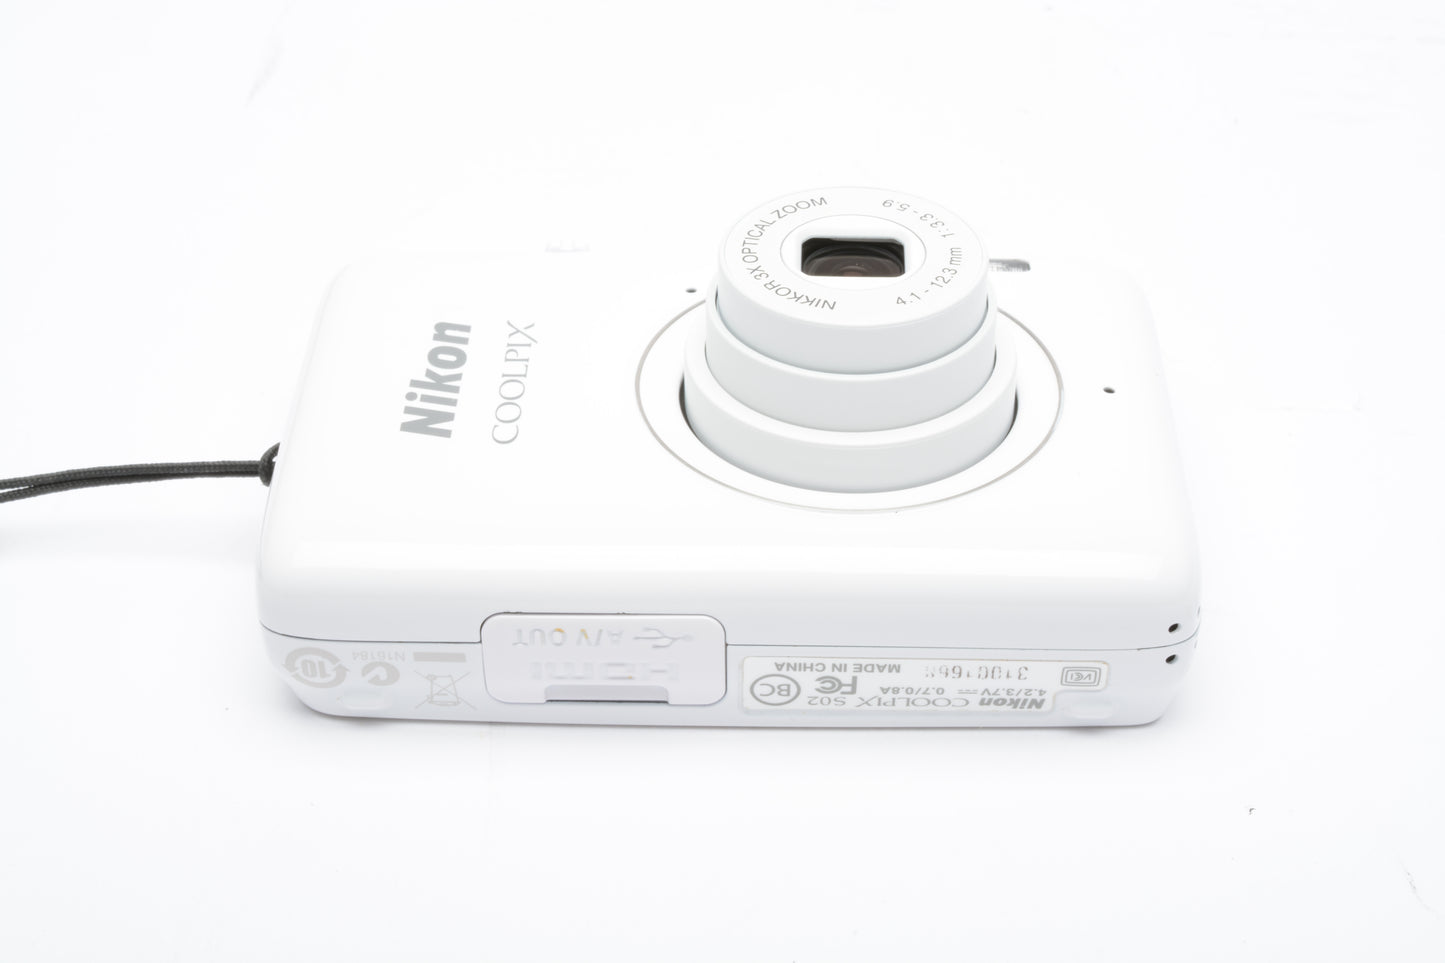 Nikon Coolpix S02 white digital Point&Shoot camera, very clean